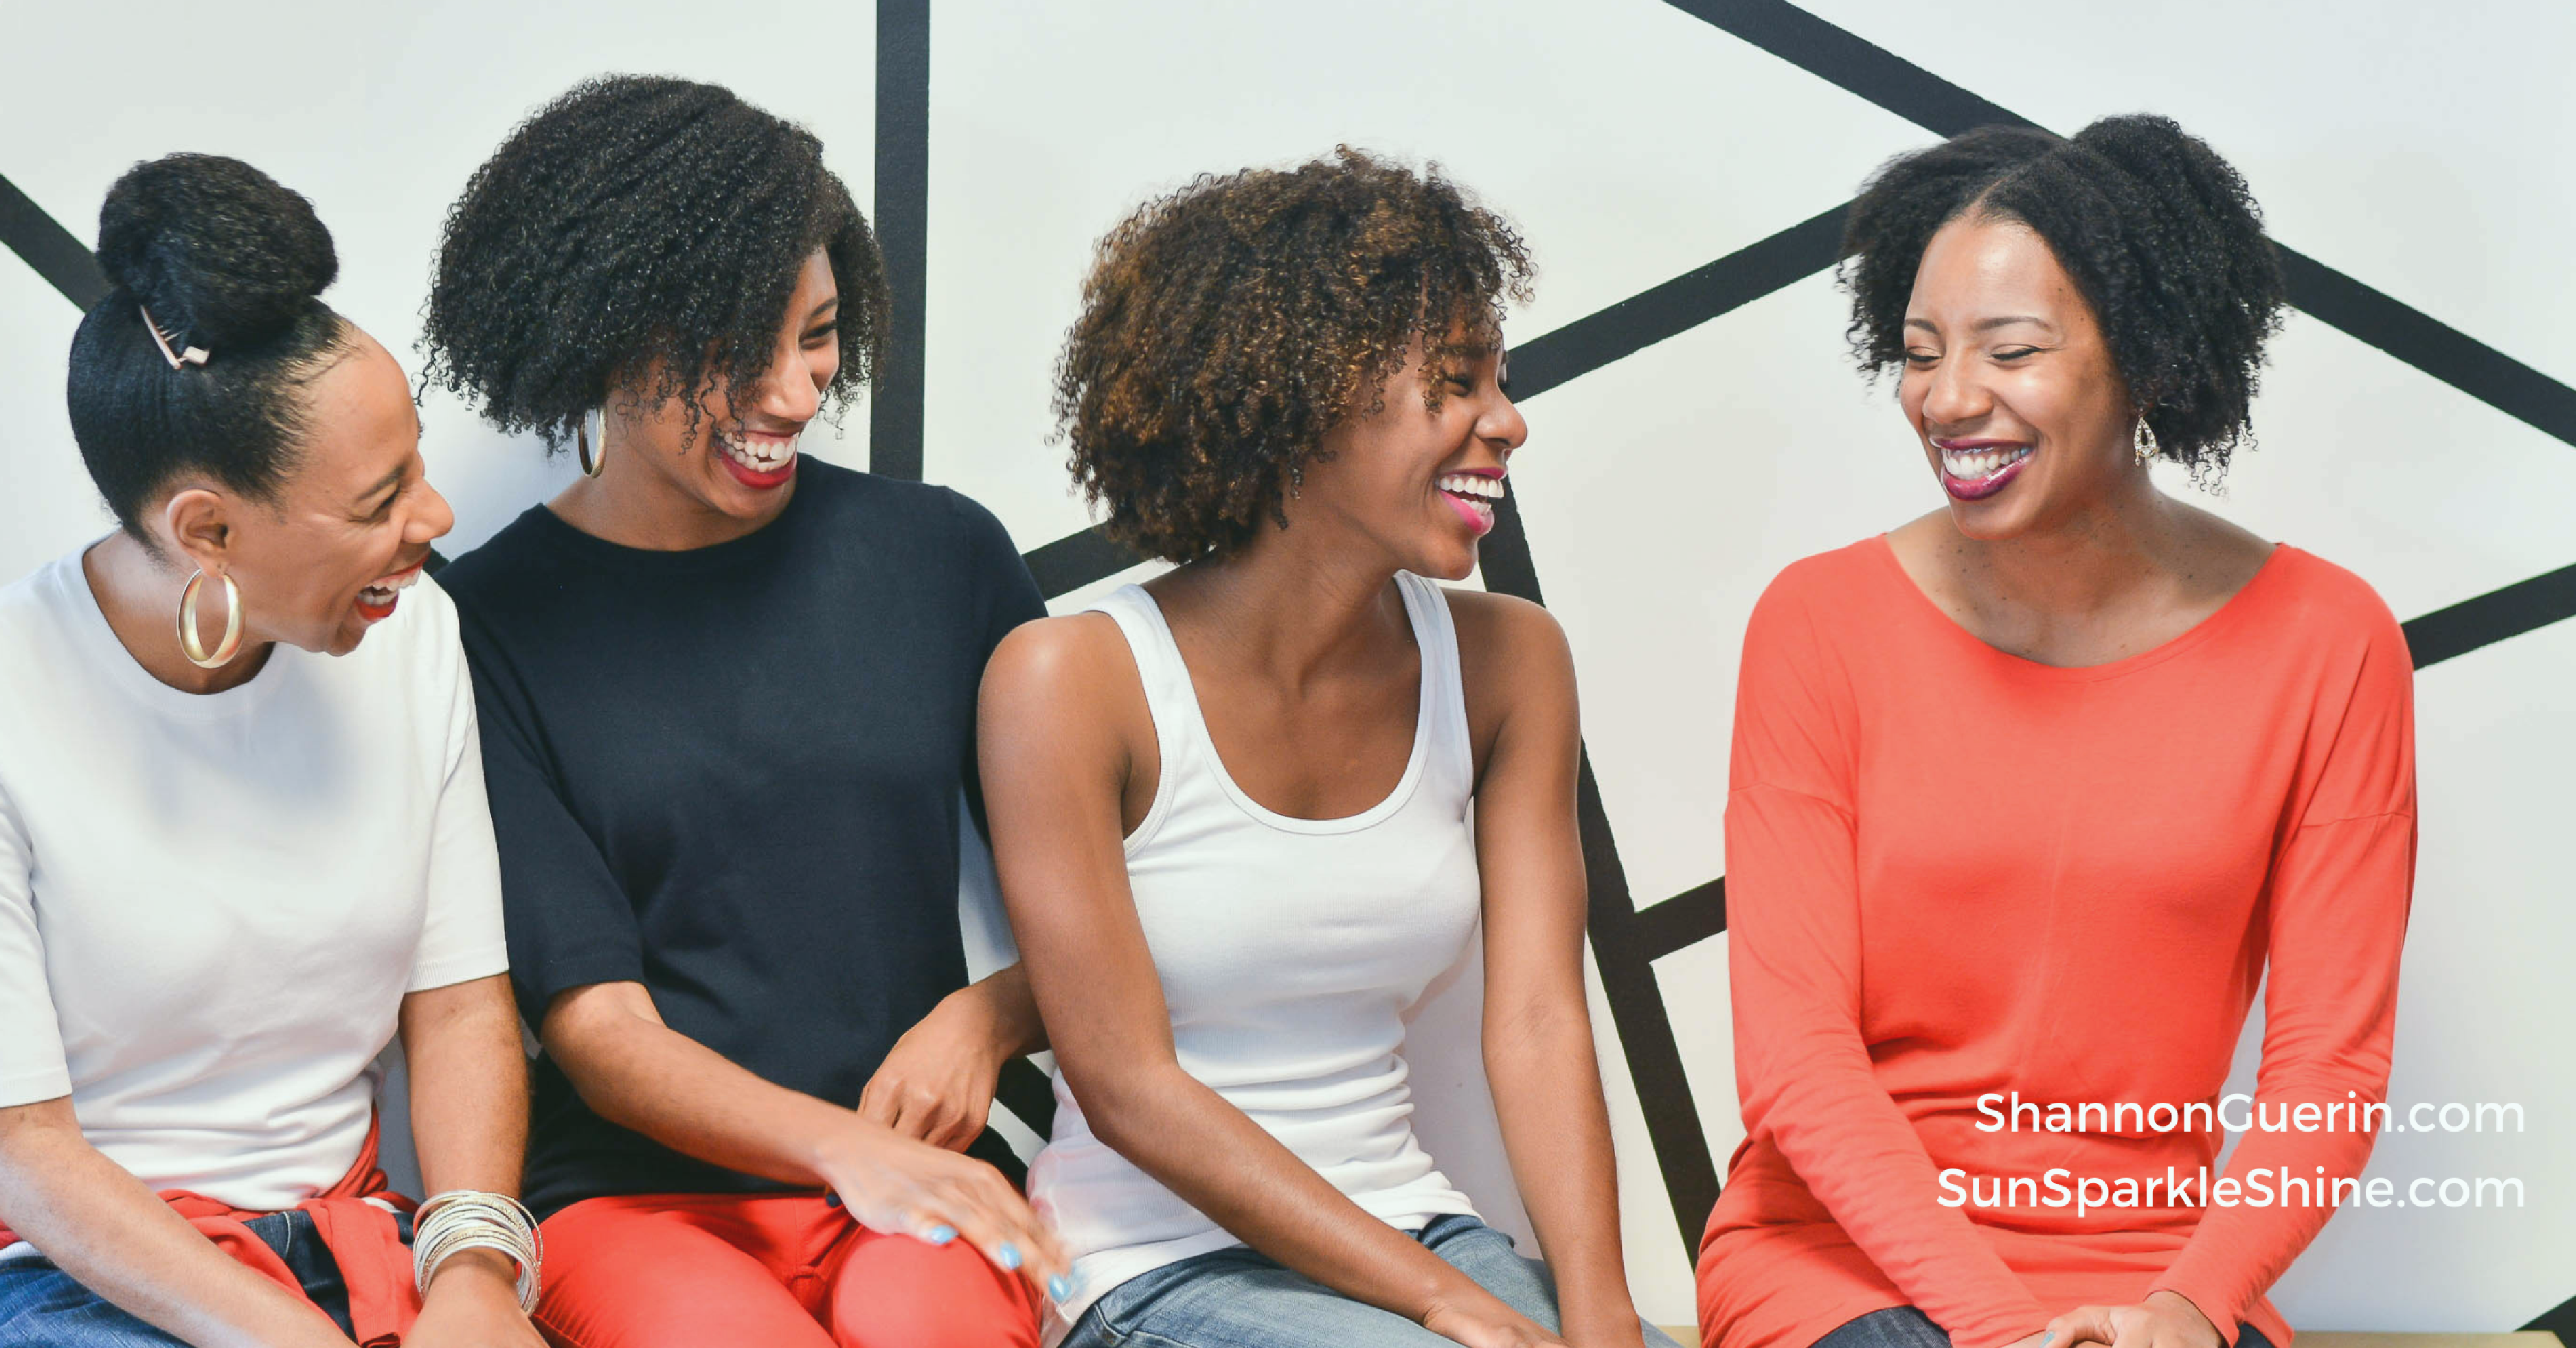 Are you seeking lasting friendships? We all have friendship goals. Here's the number one way to achieve them and the one thing that's been holding you back. 